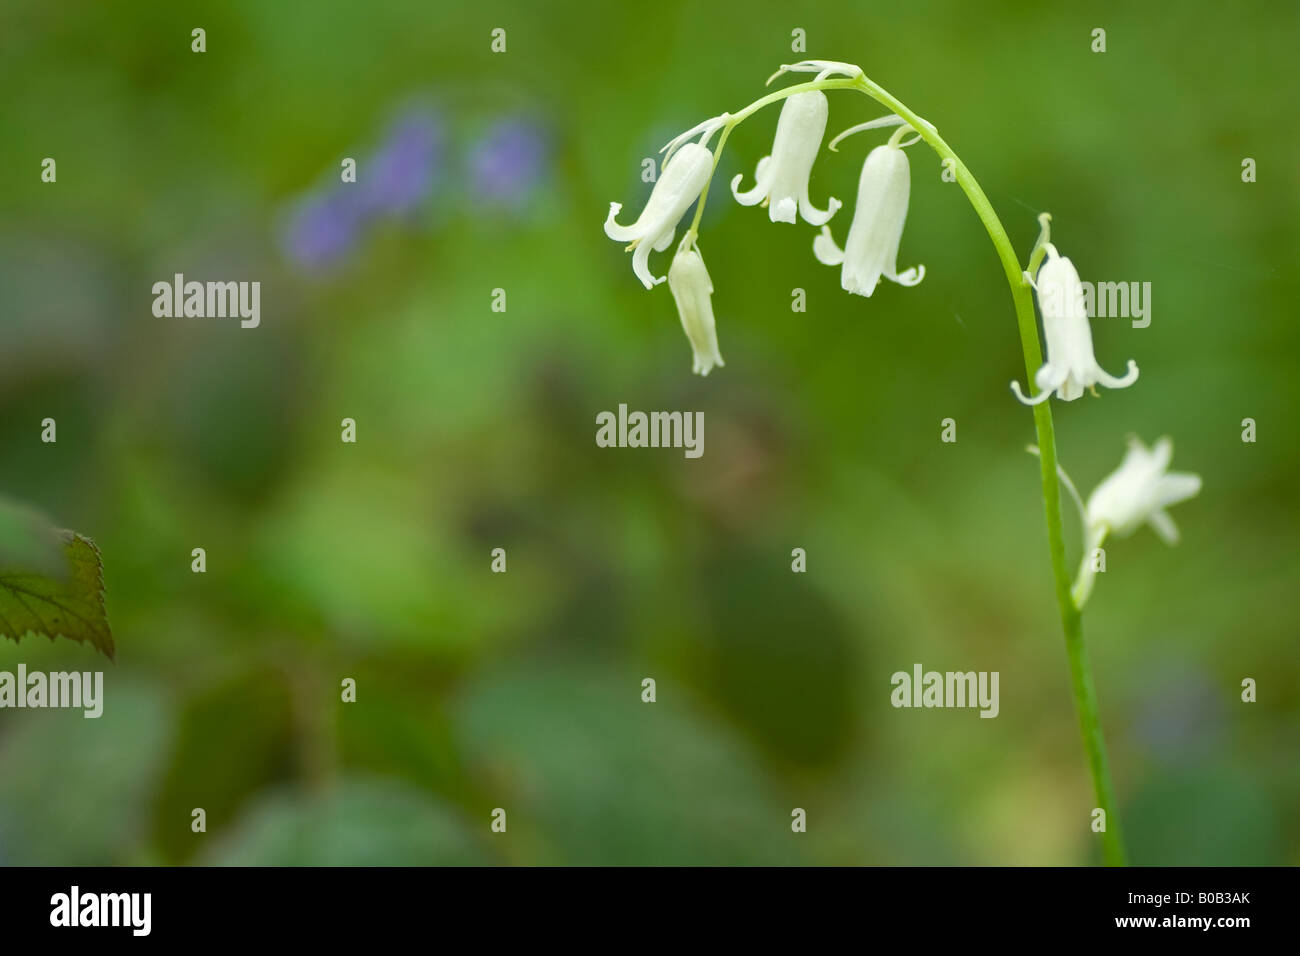 A close-up of a single white bluebell (Hyacinthoides non-scripta), Essex, UK. Stock Photo